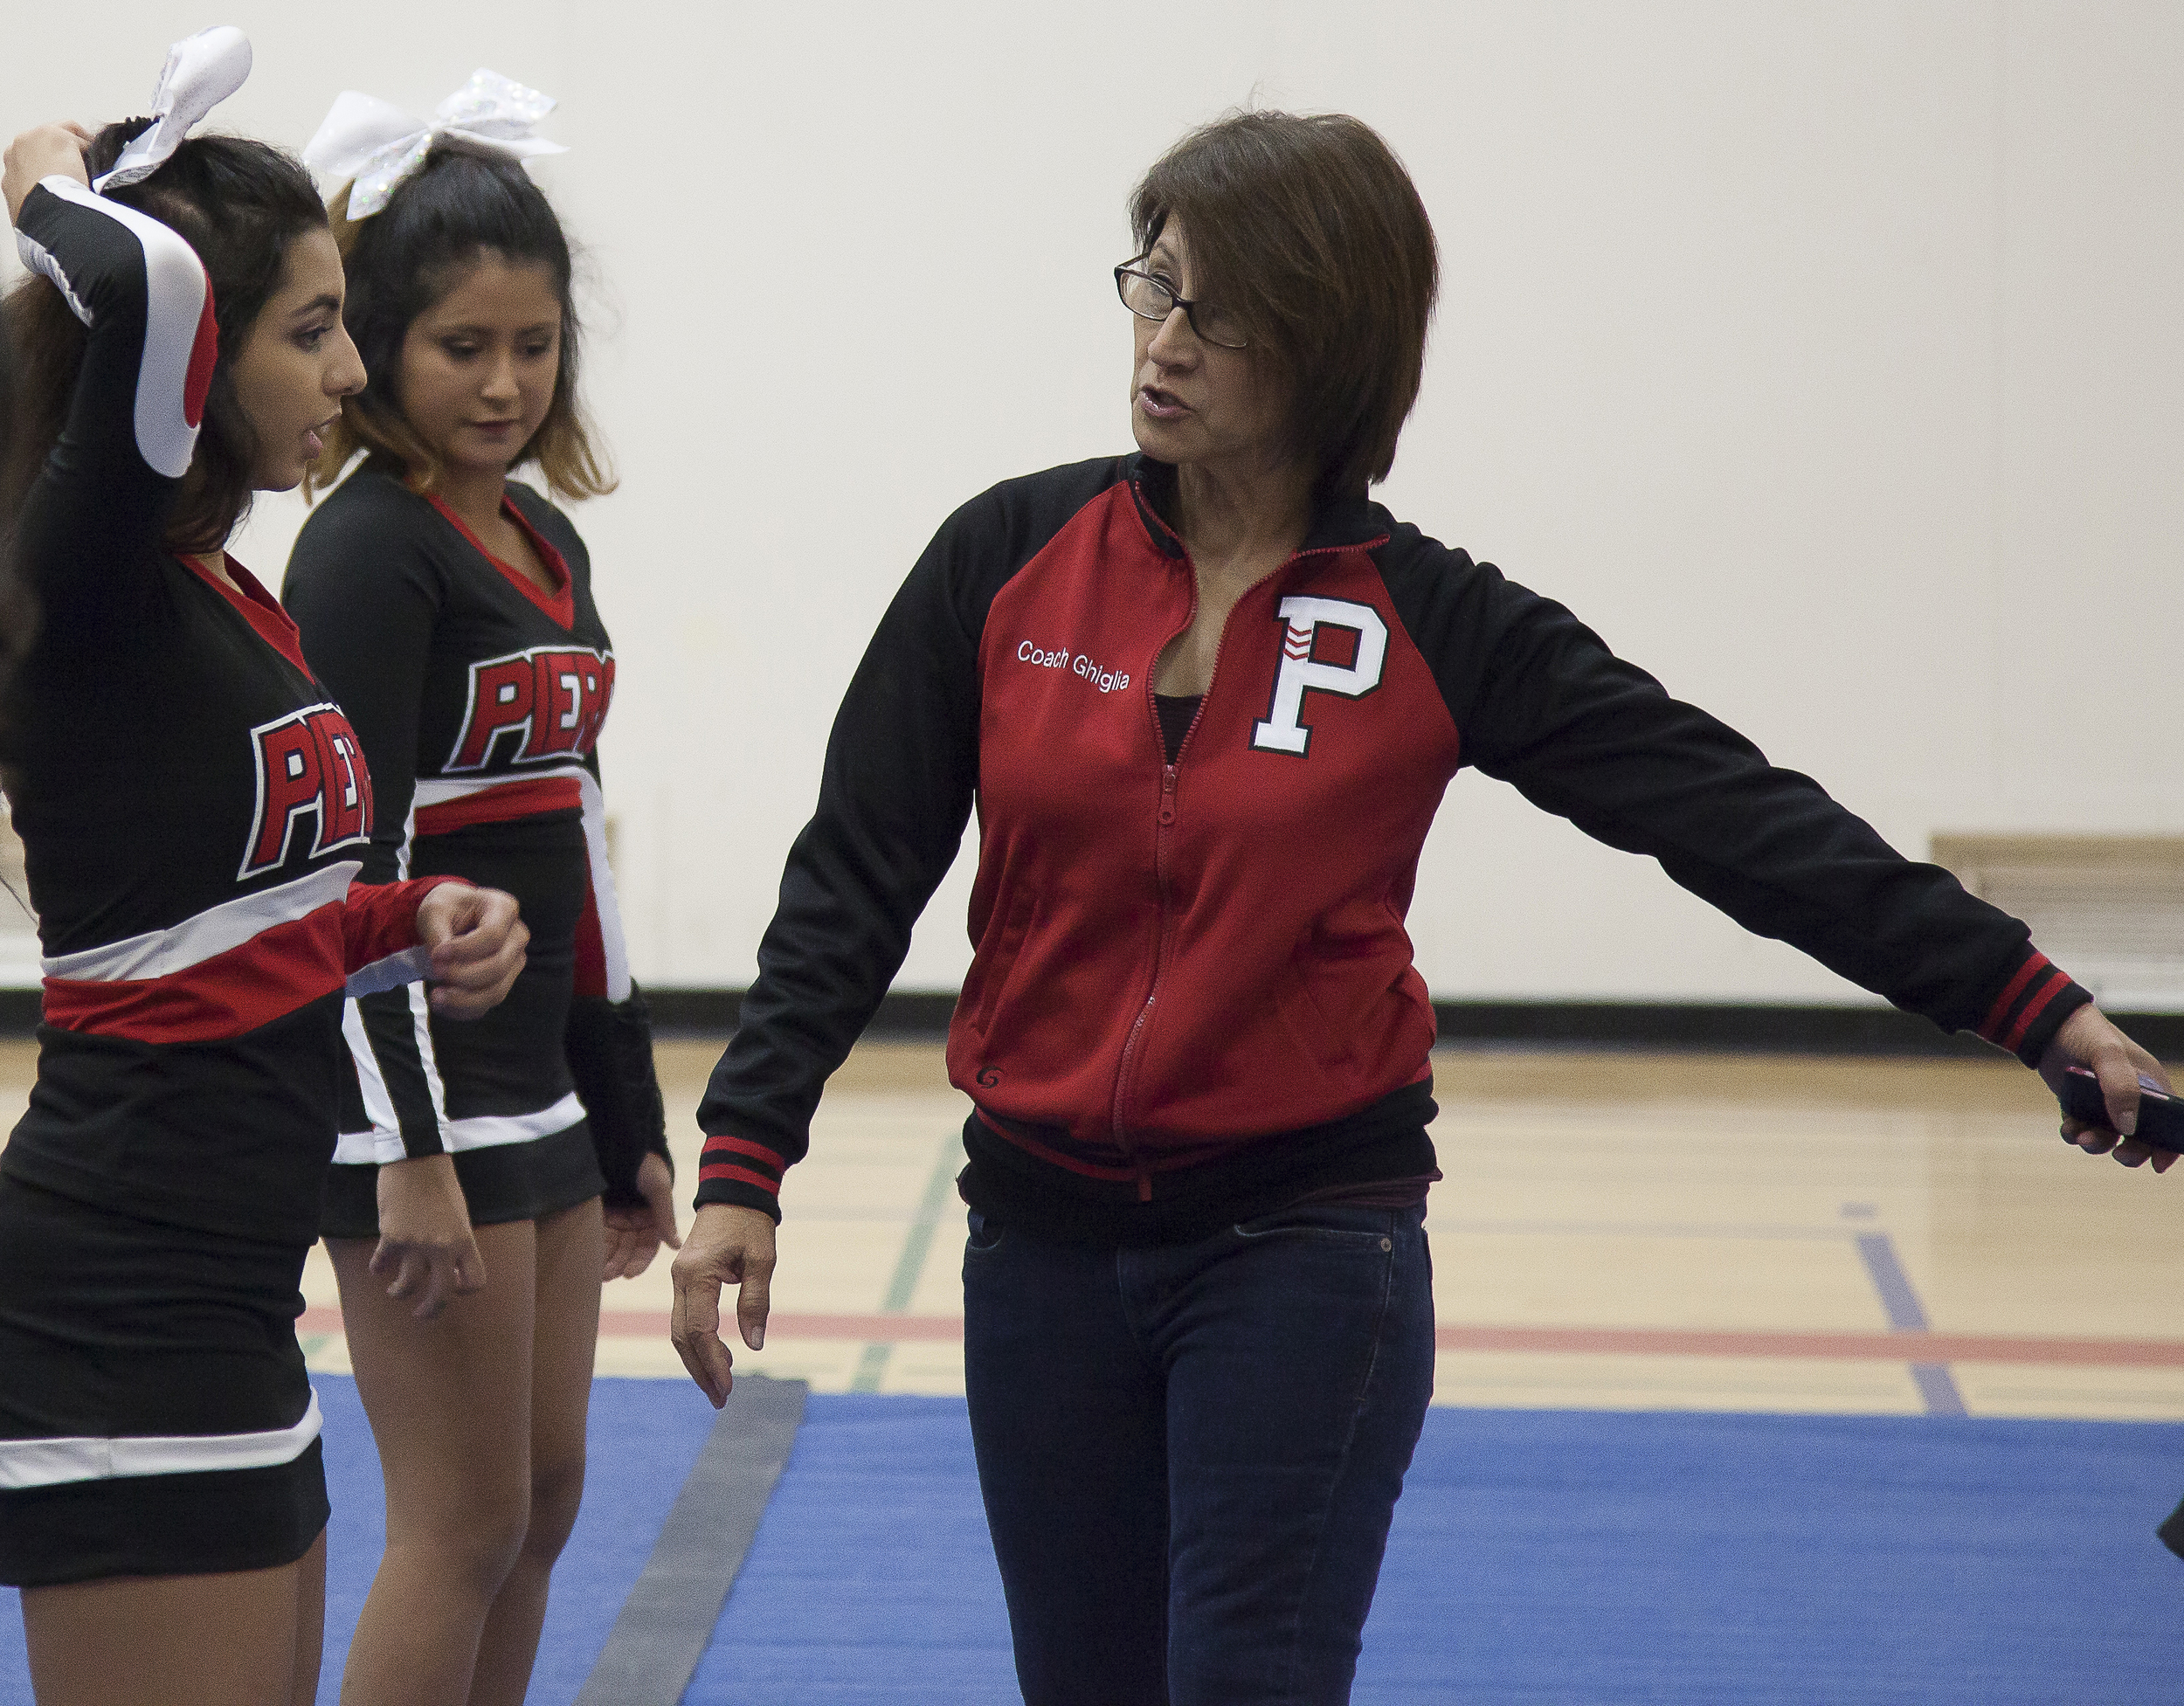  Cheer coach Jenny Ghiglia goes through the routine with Amanda Perez during practice in the North Gym on Sunday March 1, 2015. Woodland Hills, Calif.  Read the full story&nbsp; here  